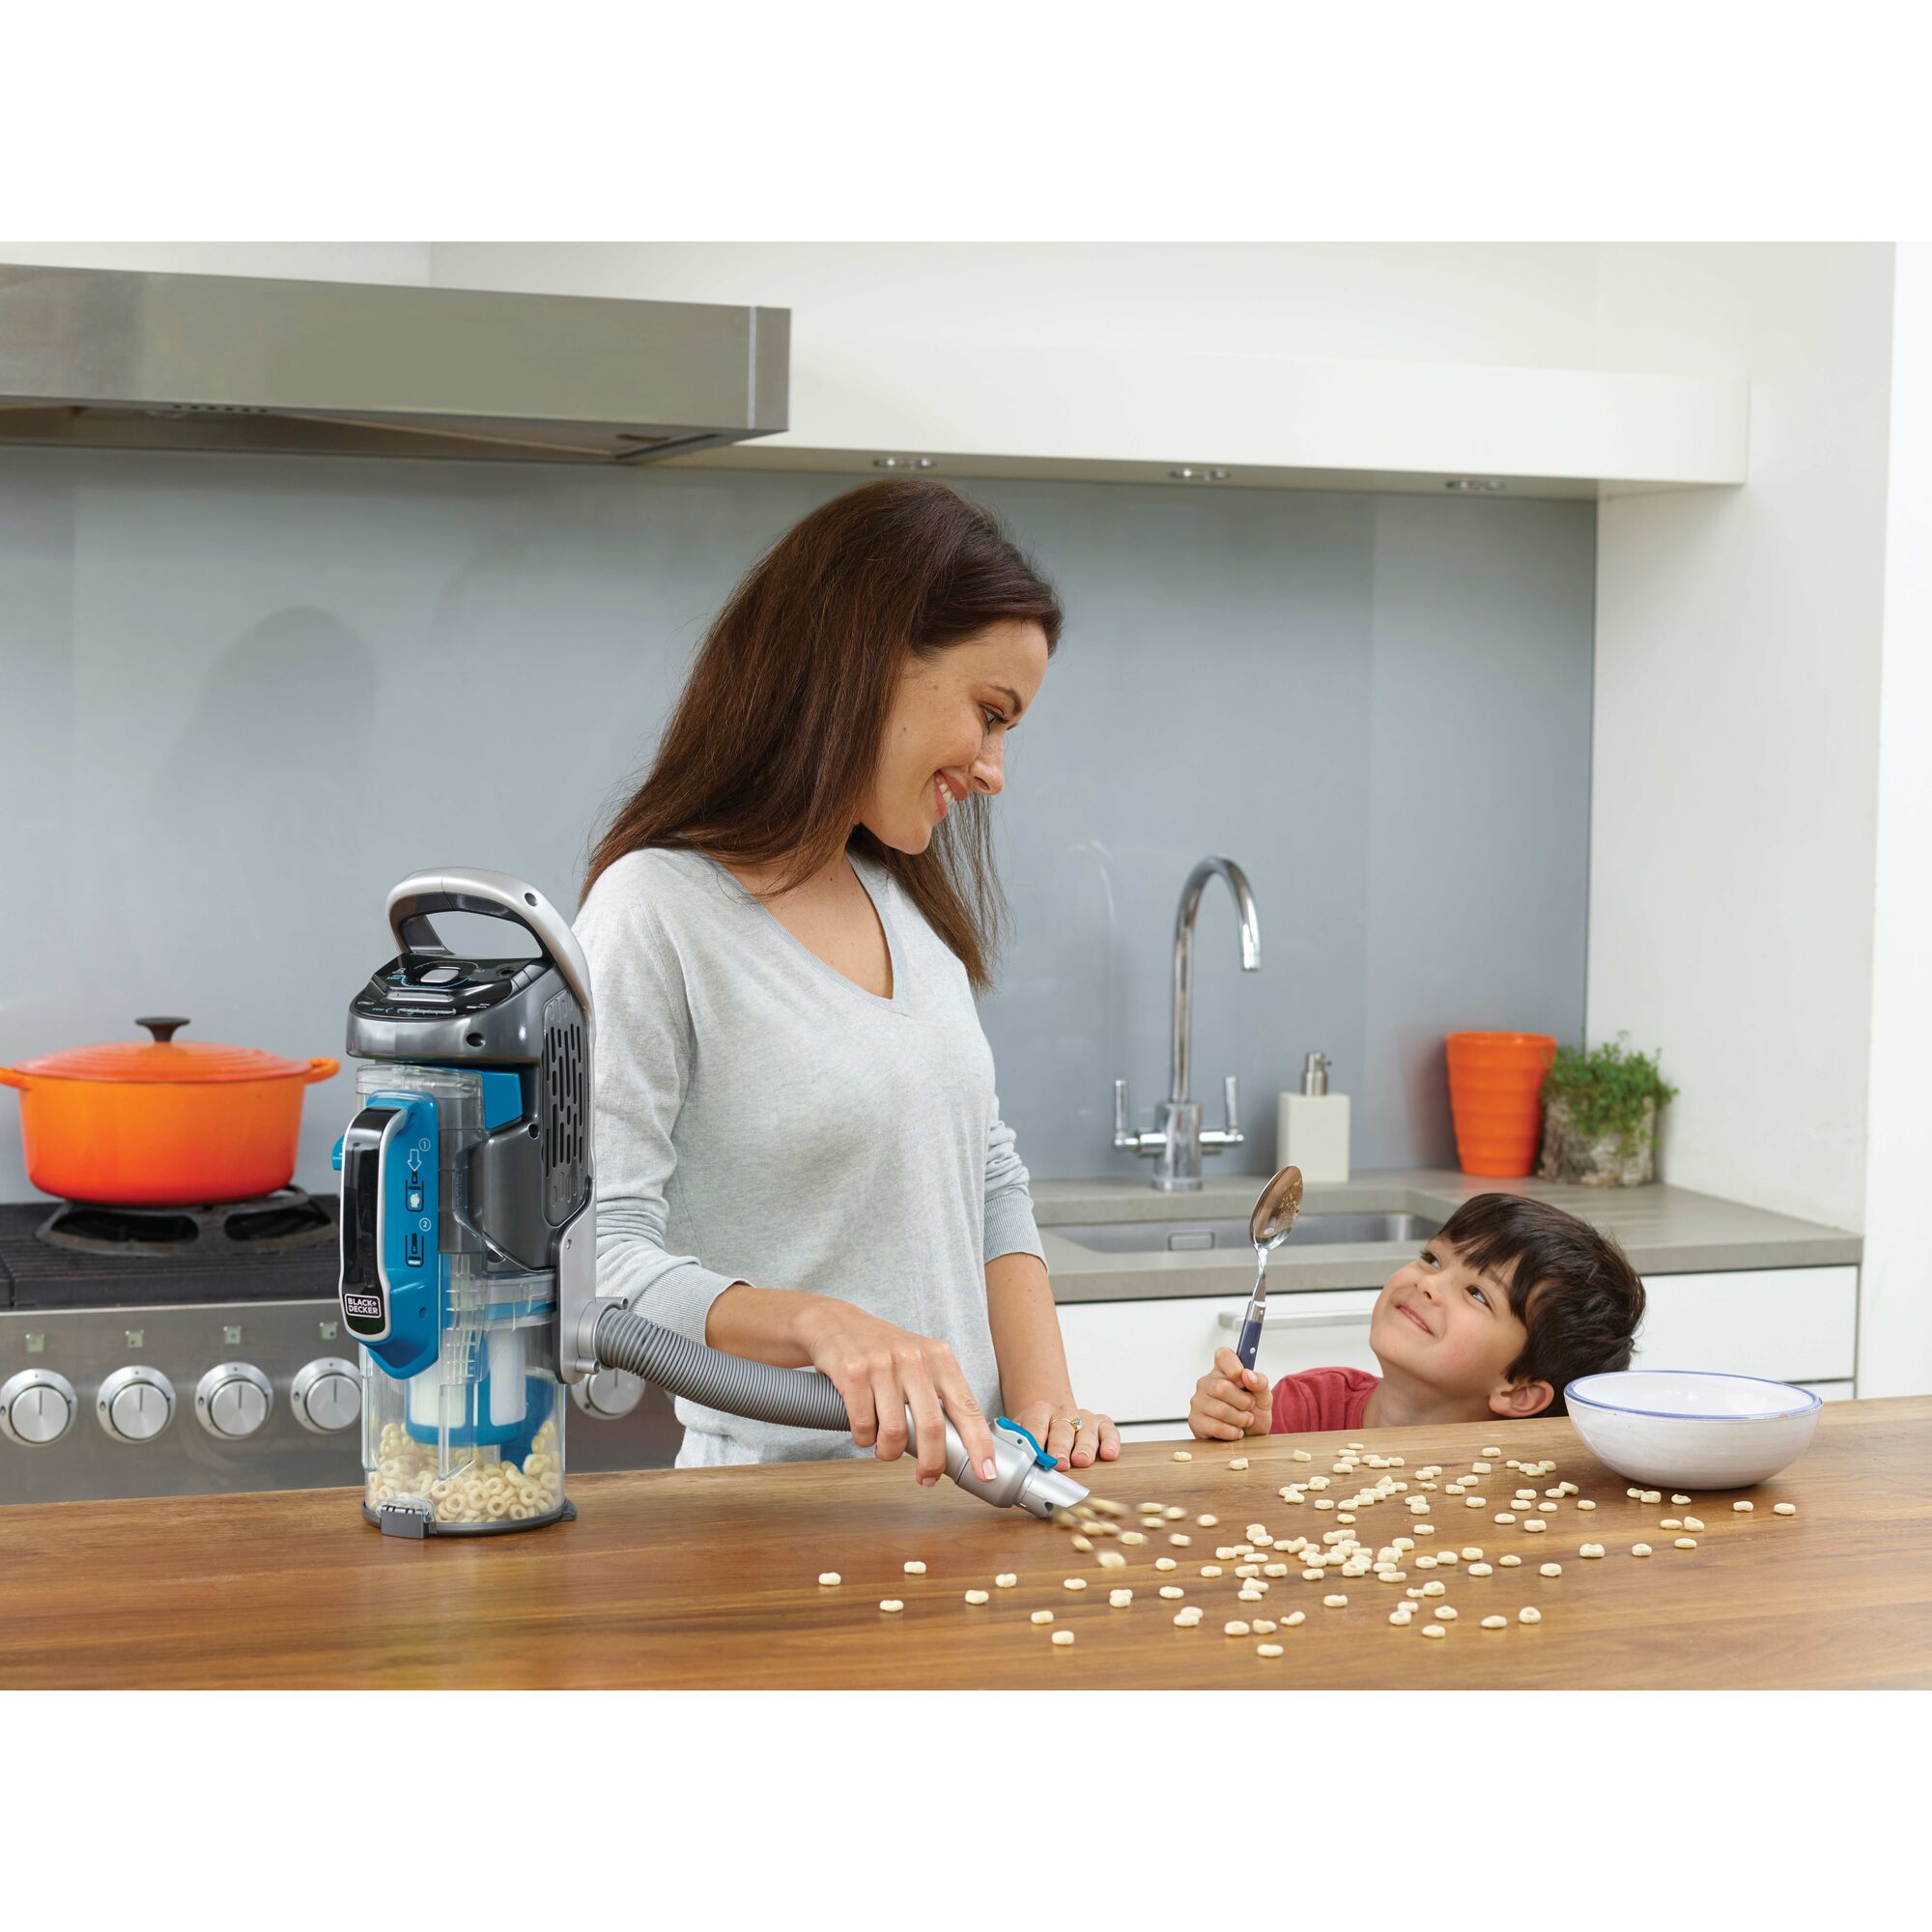 POWER SERIES PRO cordless 2 in 1 vacuum being used by a person to clean food spillage on kitchen counter.